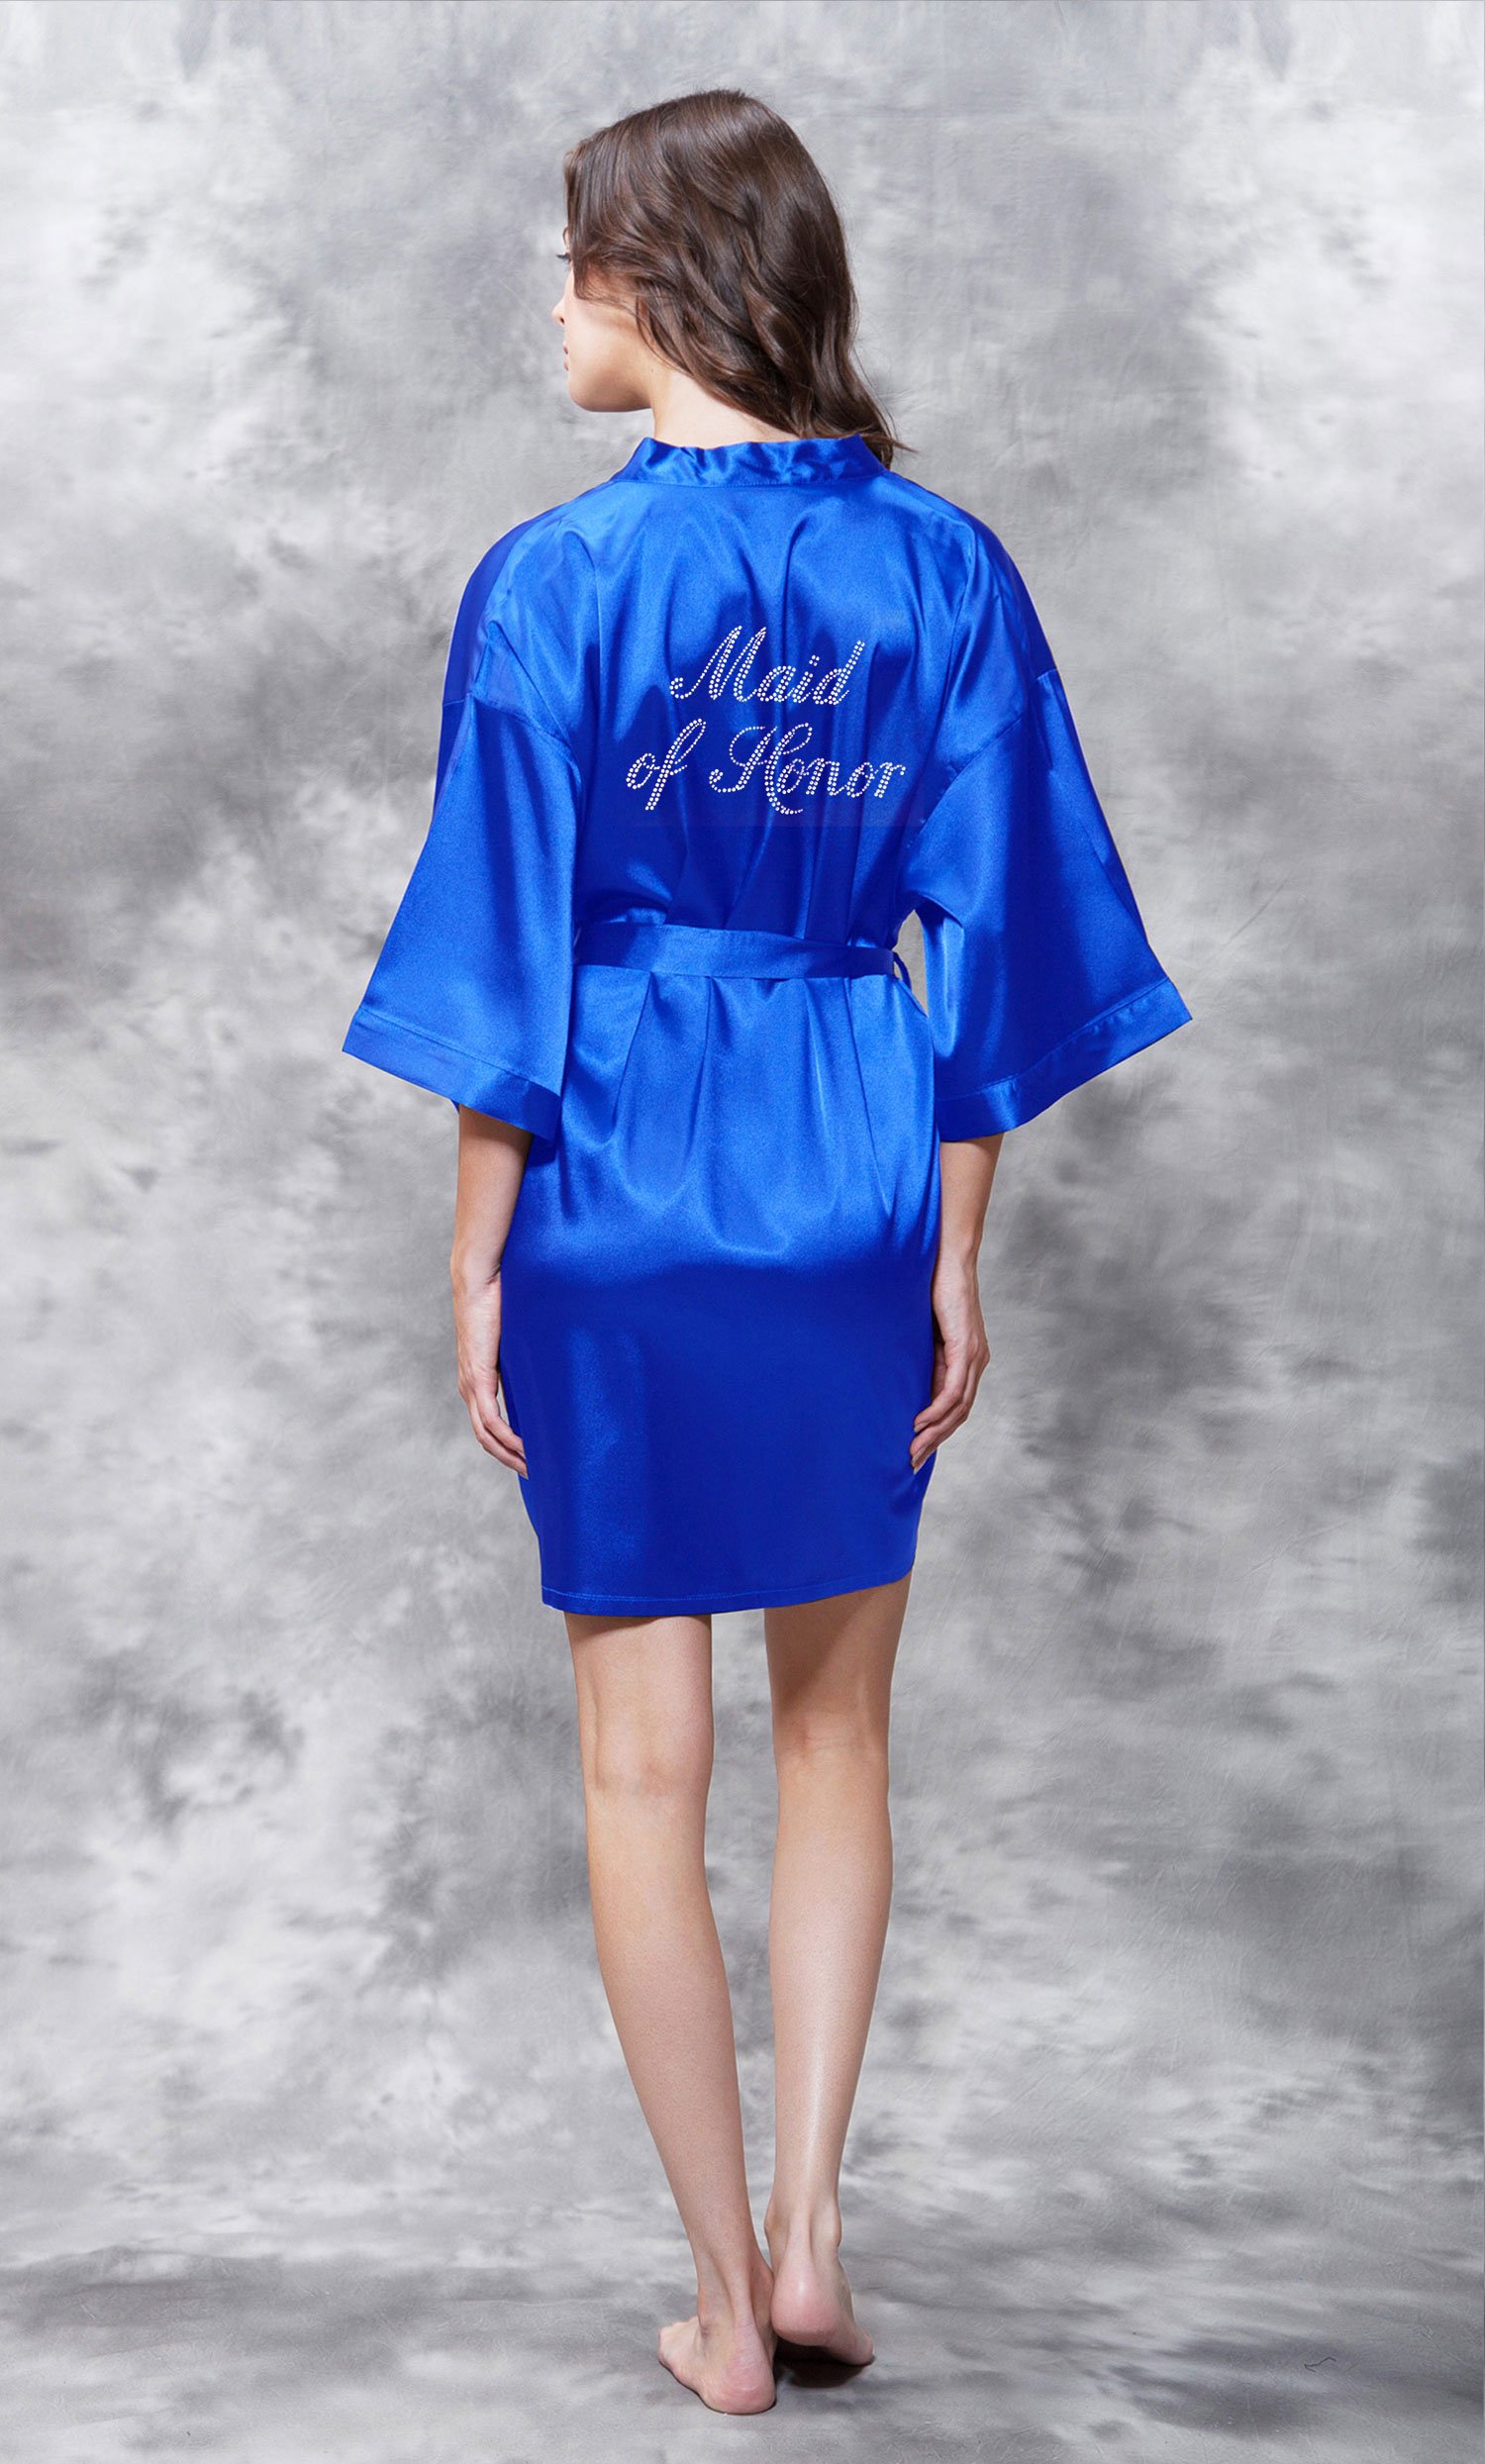 Royal Blue-Bridesmaid Title-Clear Rhinestone Satin Robe-Factory Seconds DEAL!!